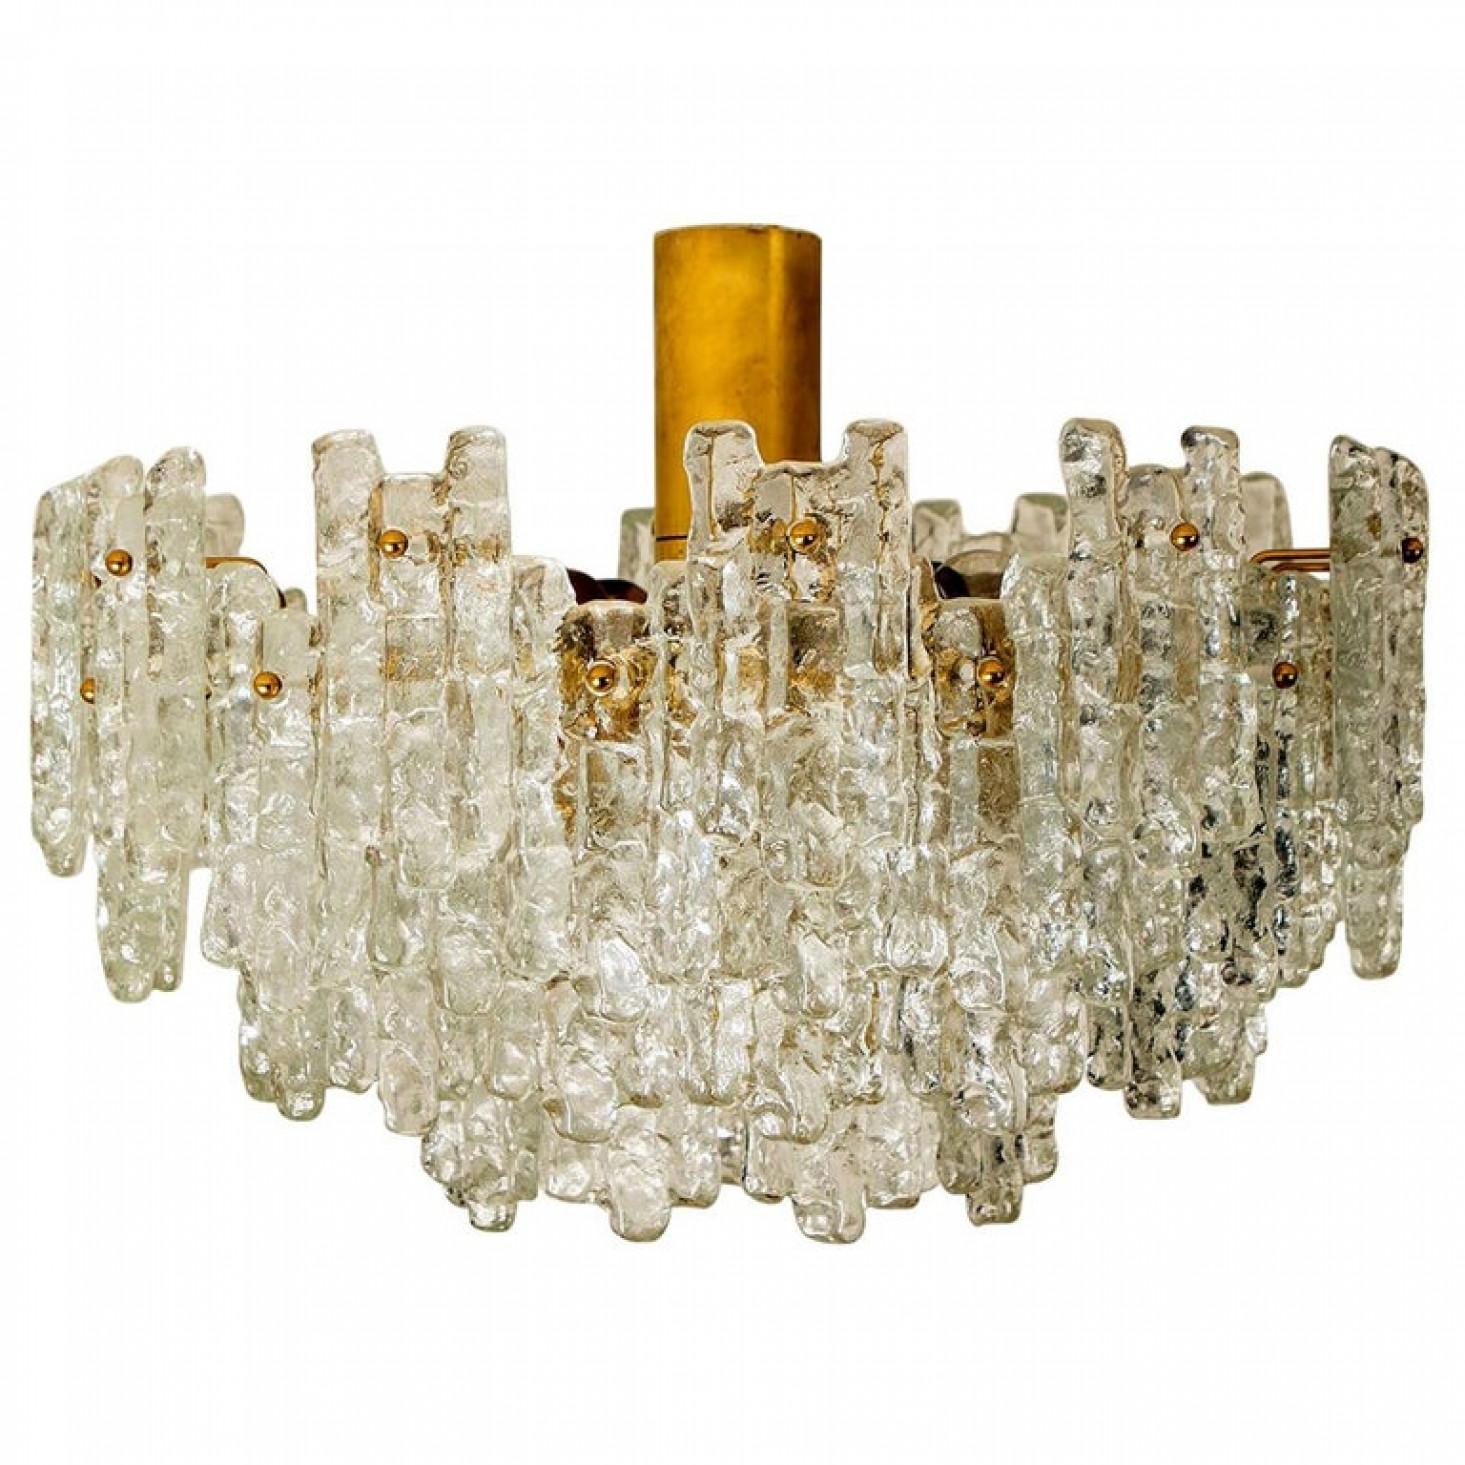 1 of the 2 exceptional, huge, clean and modern ballroom flush mount by J.T. Kalmar Leuchten from the 1960s. The chandelier consists layers with several hand blown textured glass shades mounted on a brass frame arranged in concentric rings.

This